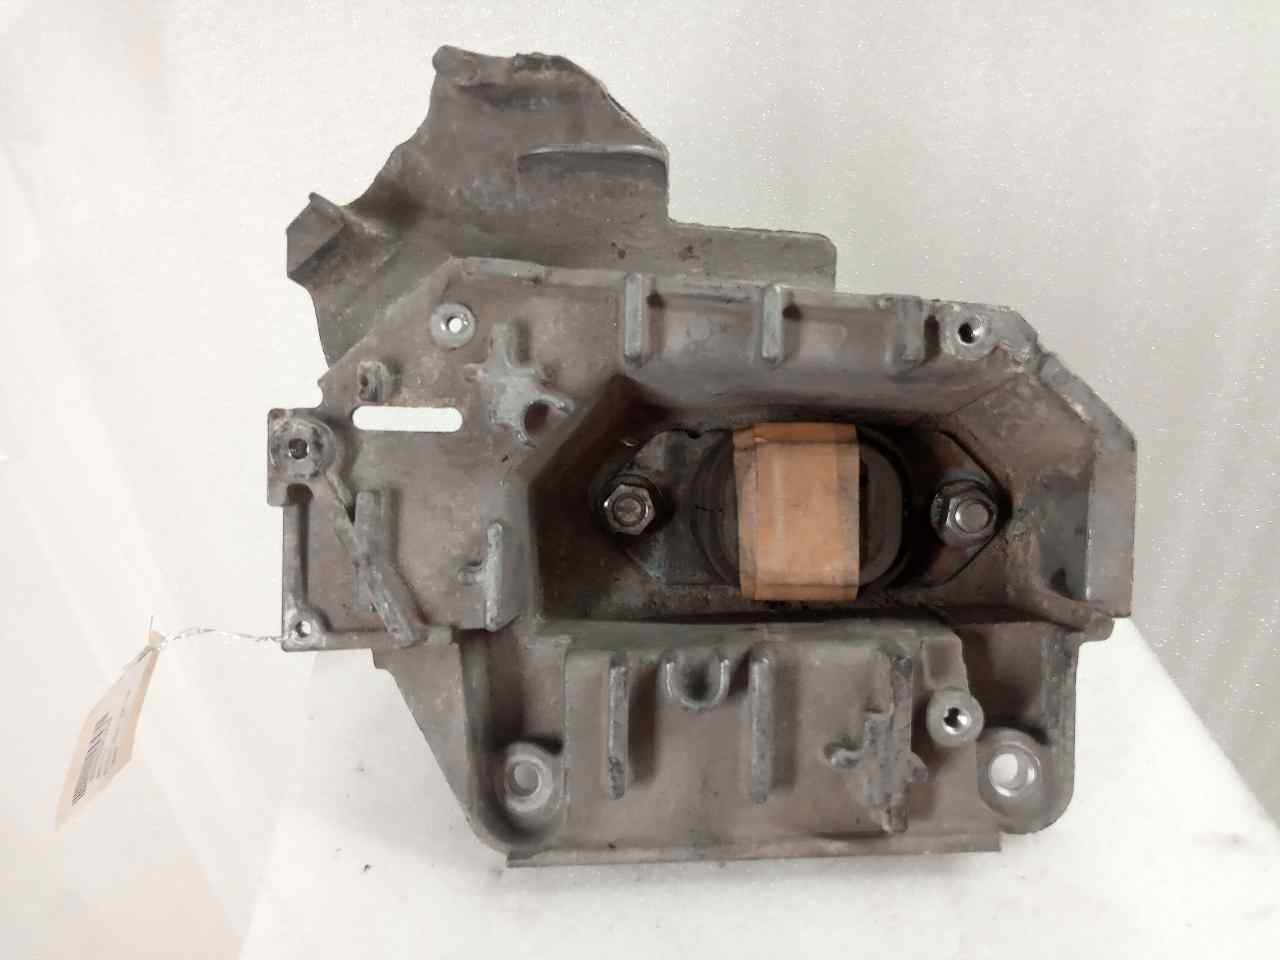 SEAT Ibiza 3 generation (2002-2008) Other Engine Compartment Parts 11254AX600 25316923